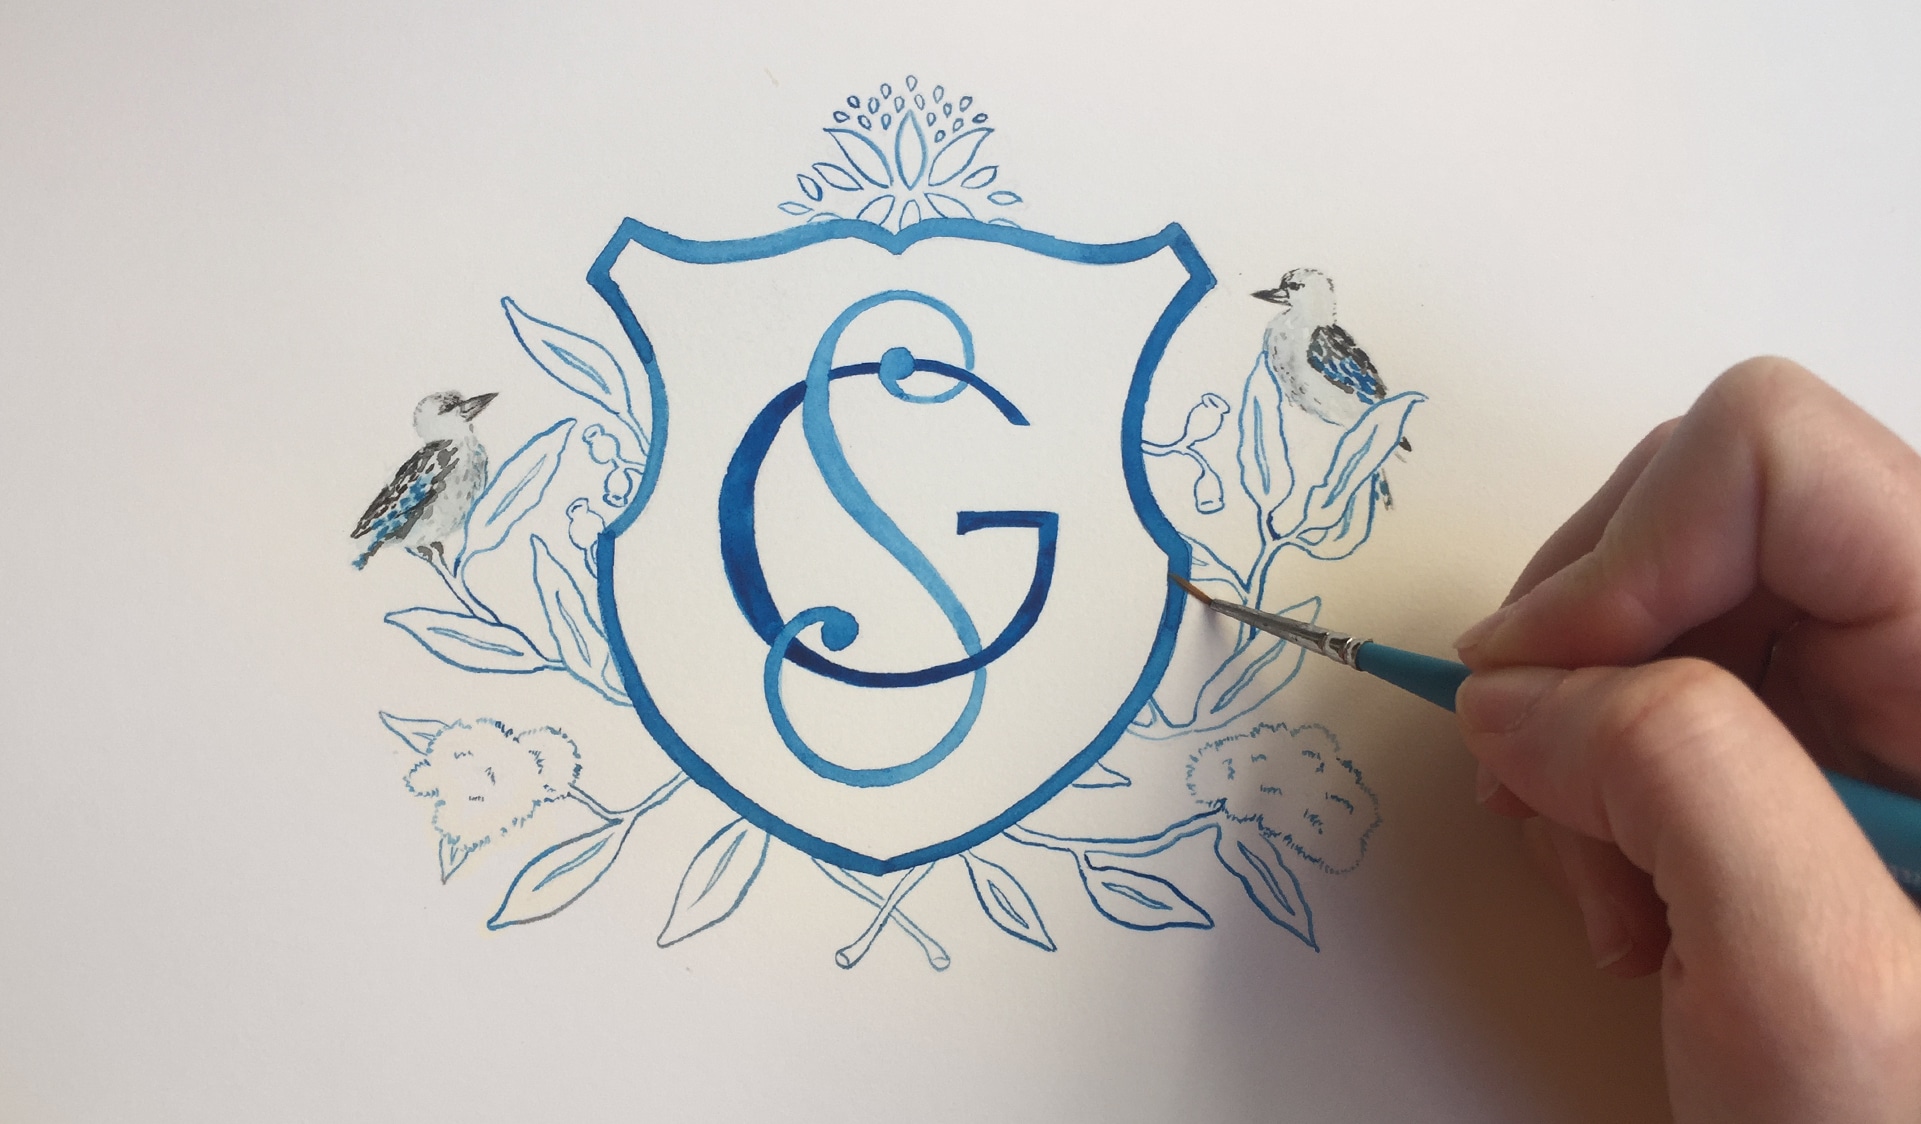 Watercolor painting of crest and monogram